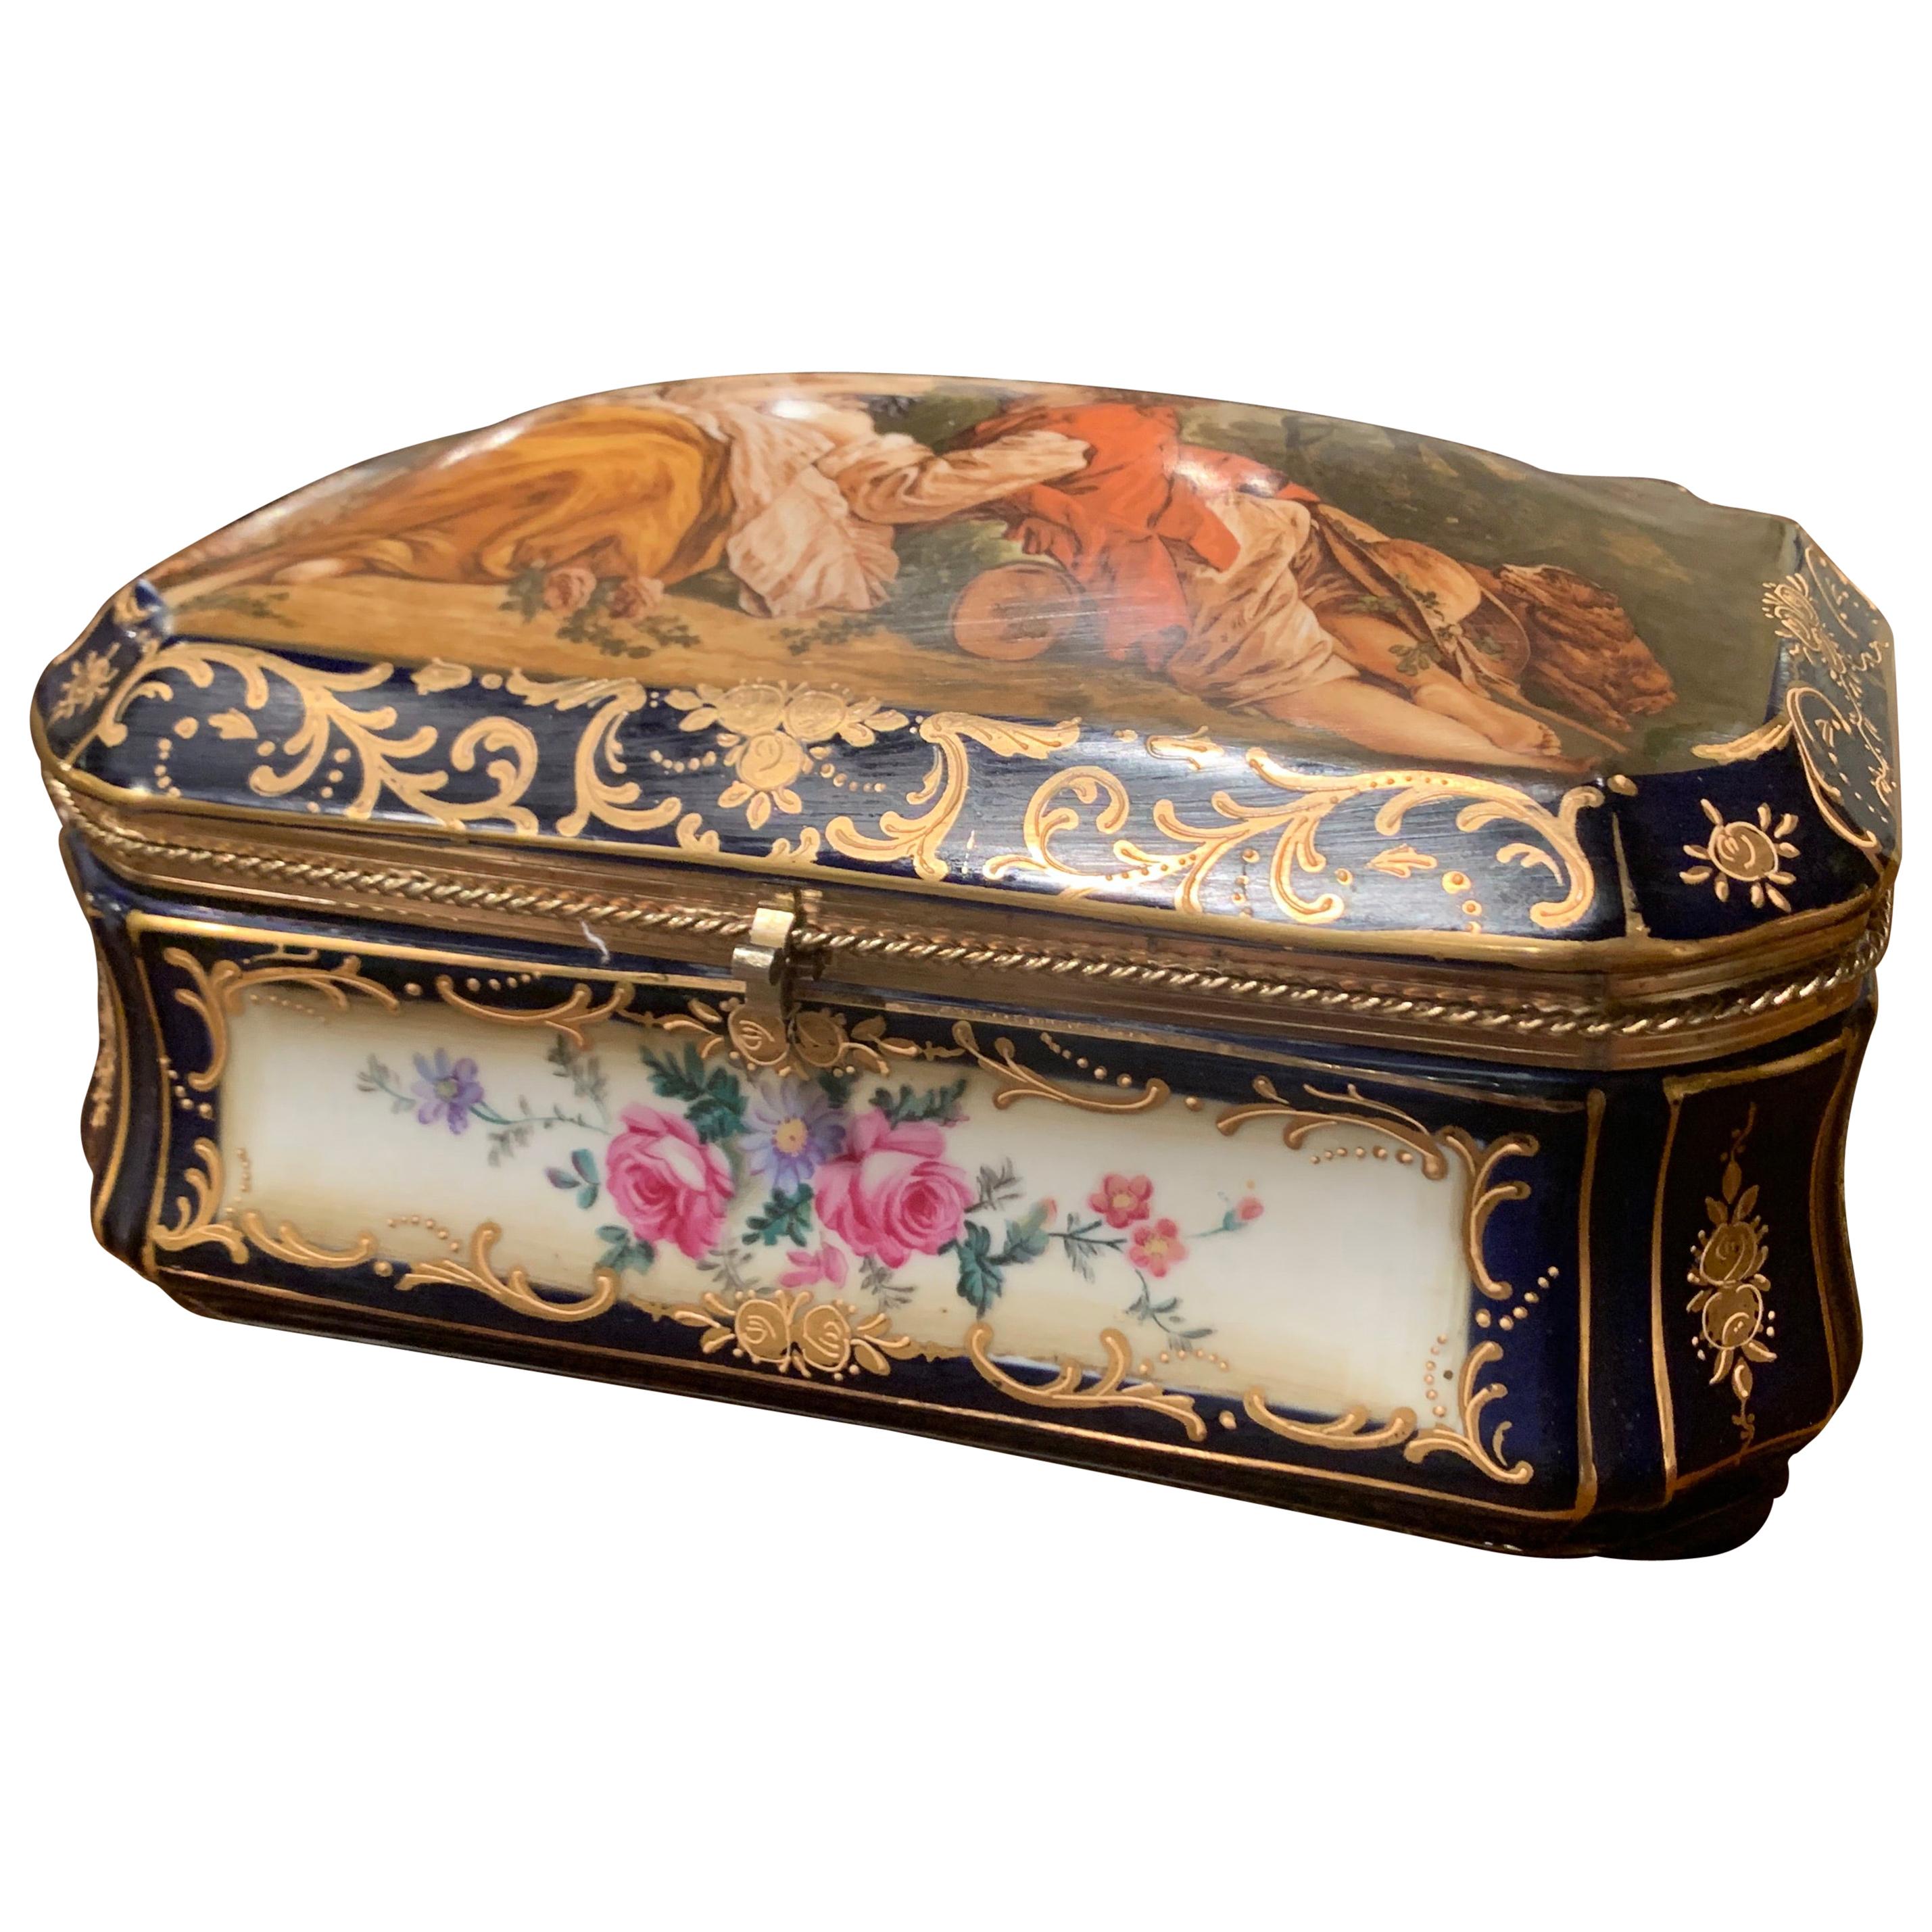 19th Century French Sèvres Painted Porcelain and Gilt Brass Casket Jewelry Box